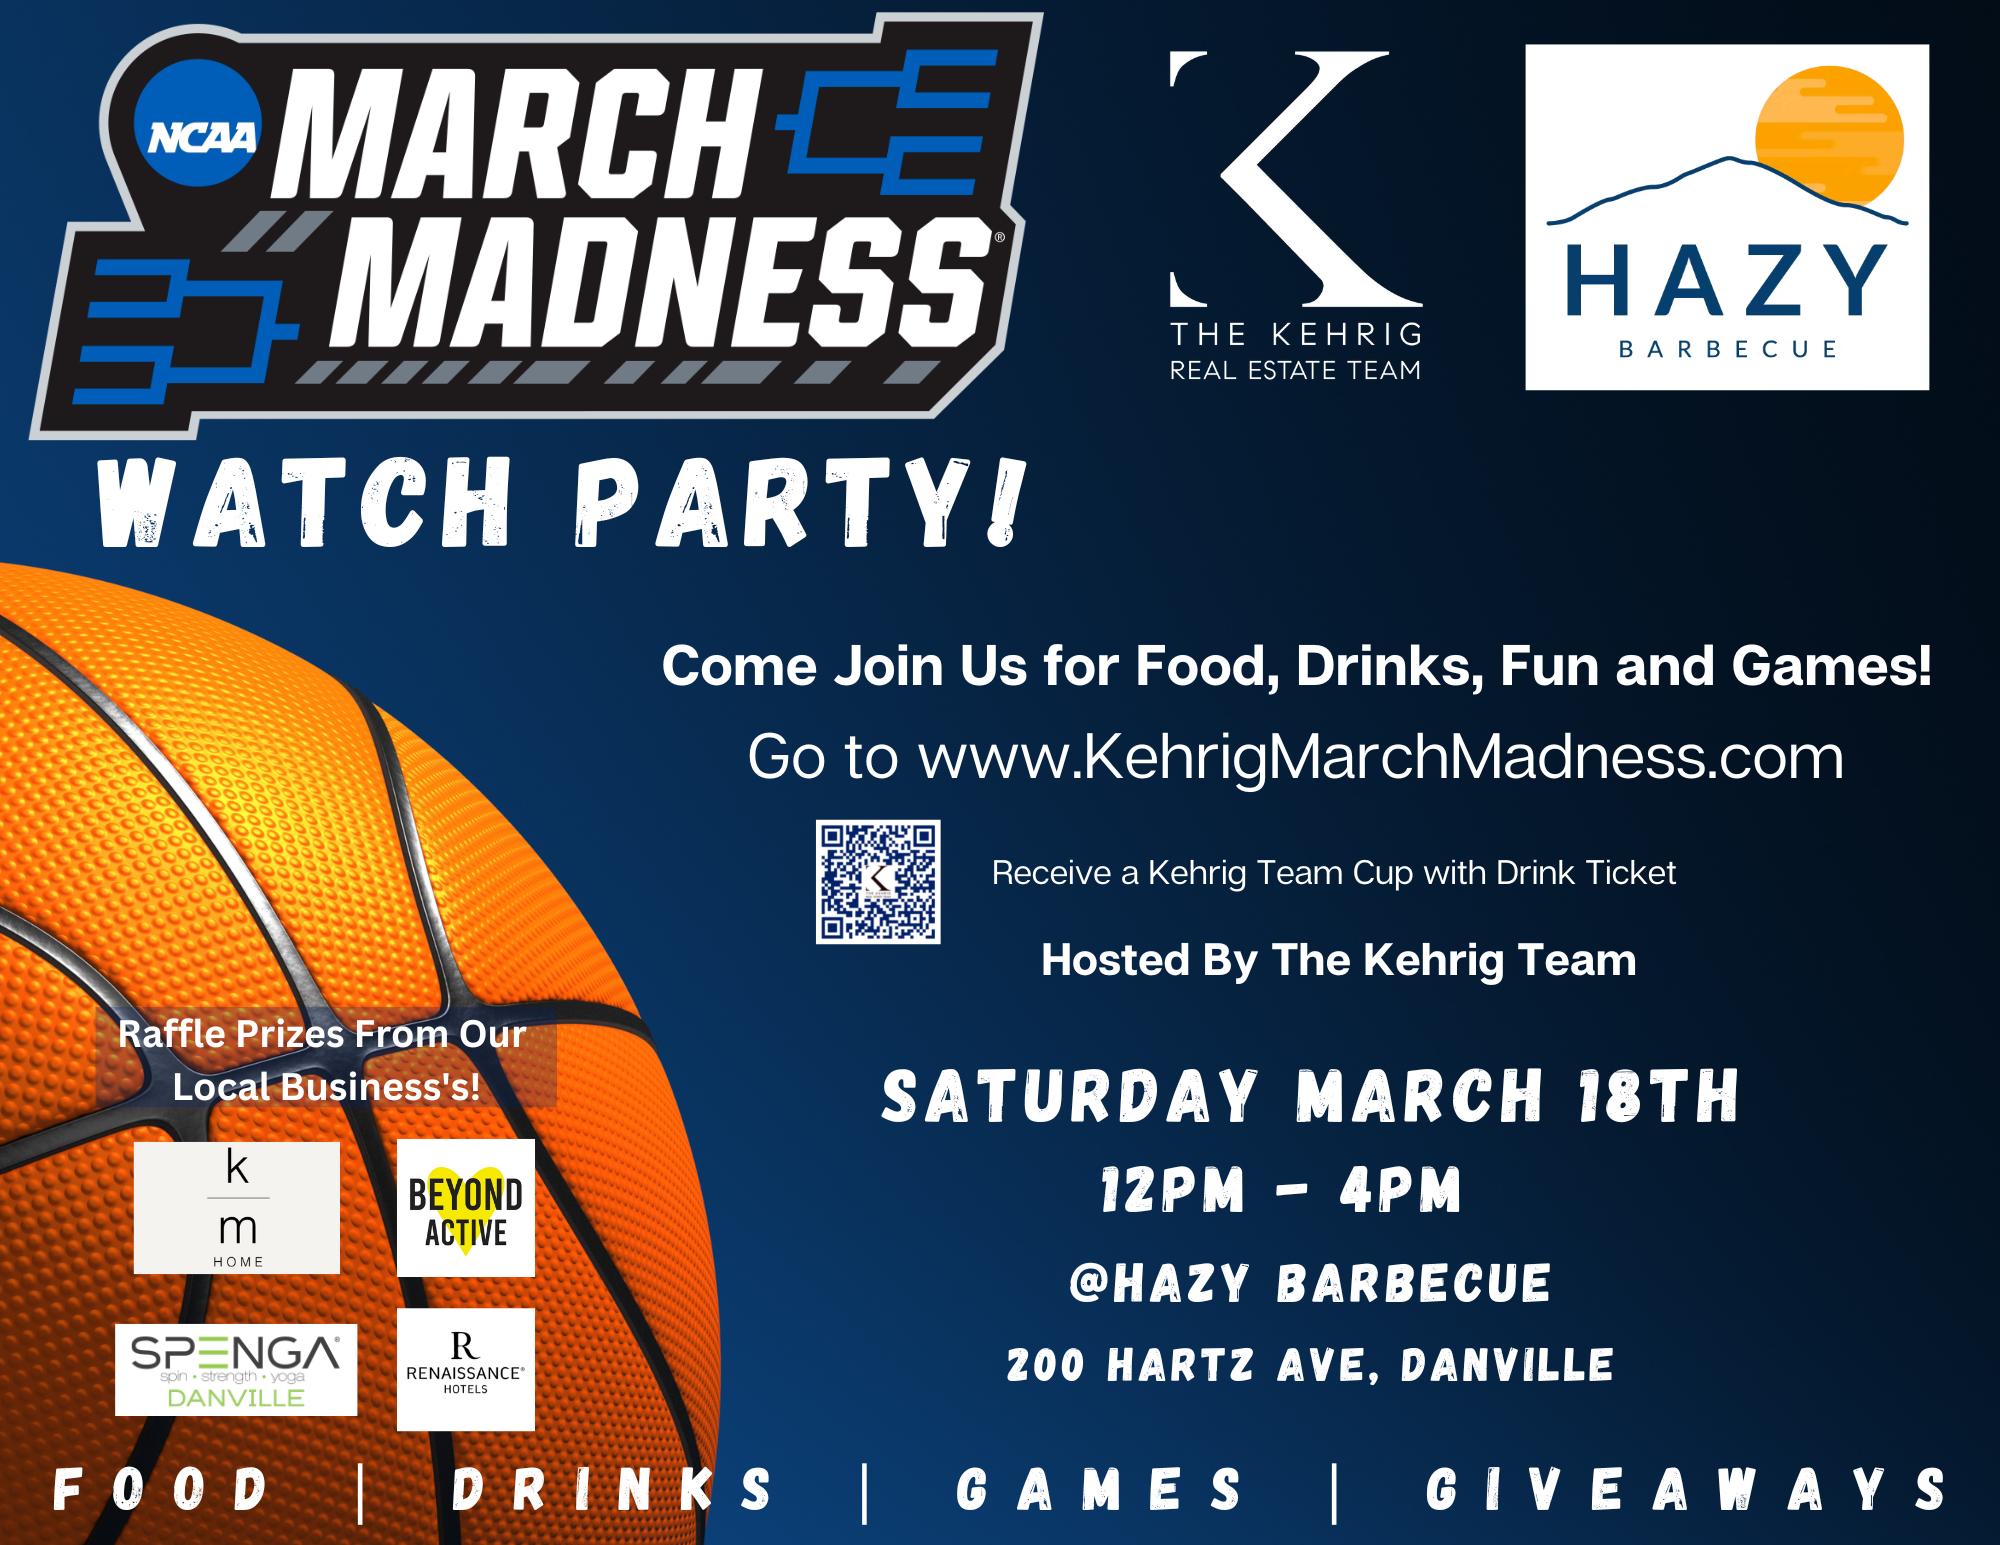 March Madness Watch Party 2023 at Hazy Barbecue in Danville The